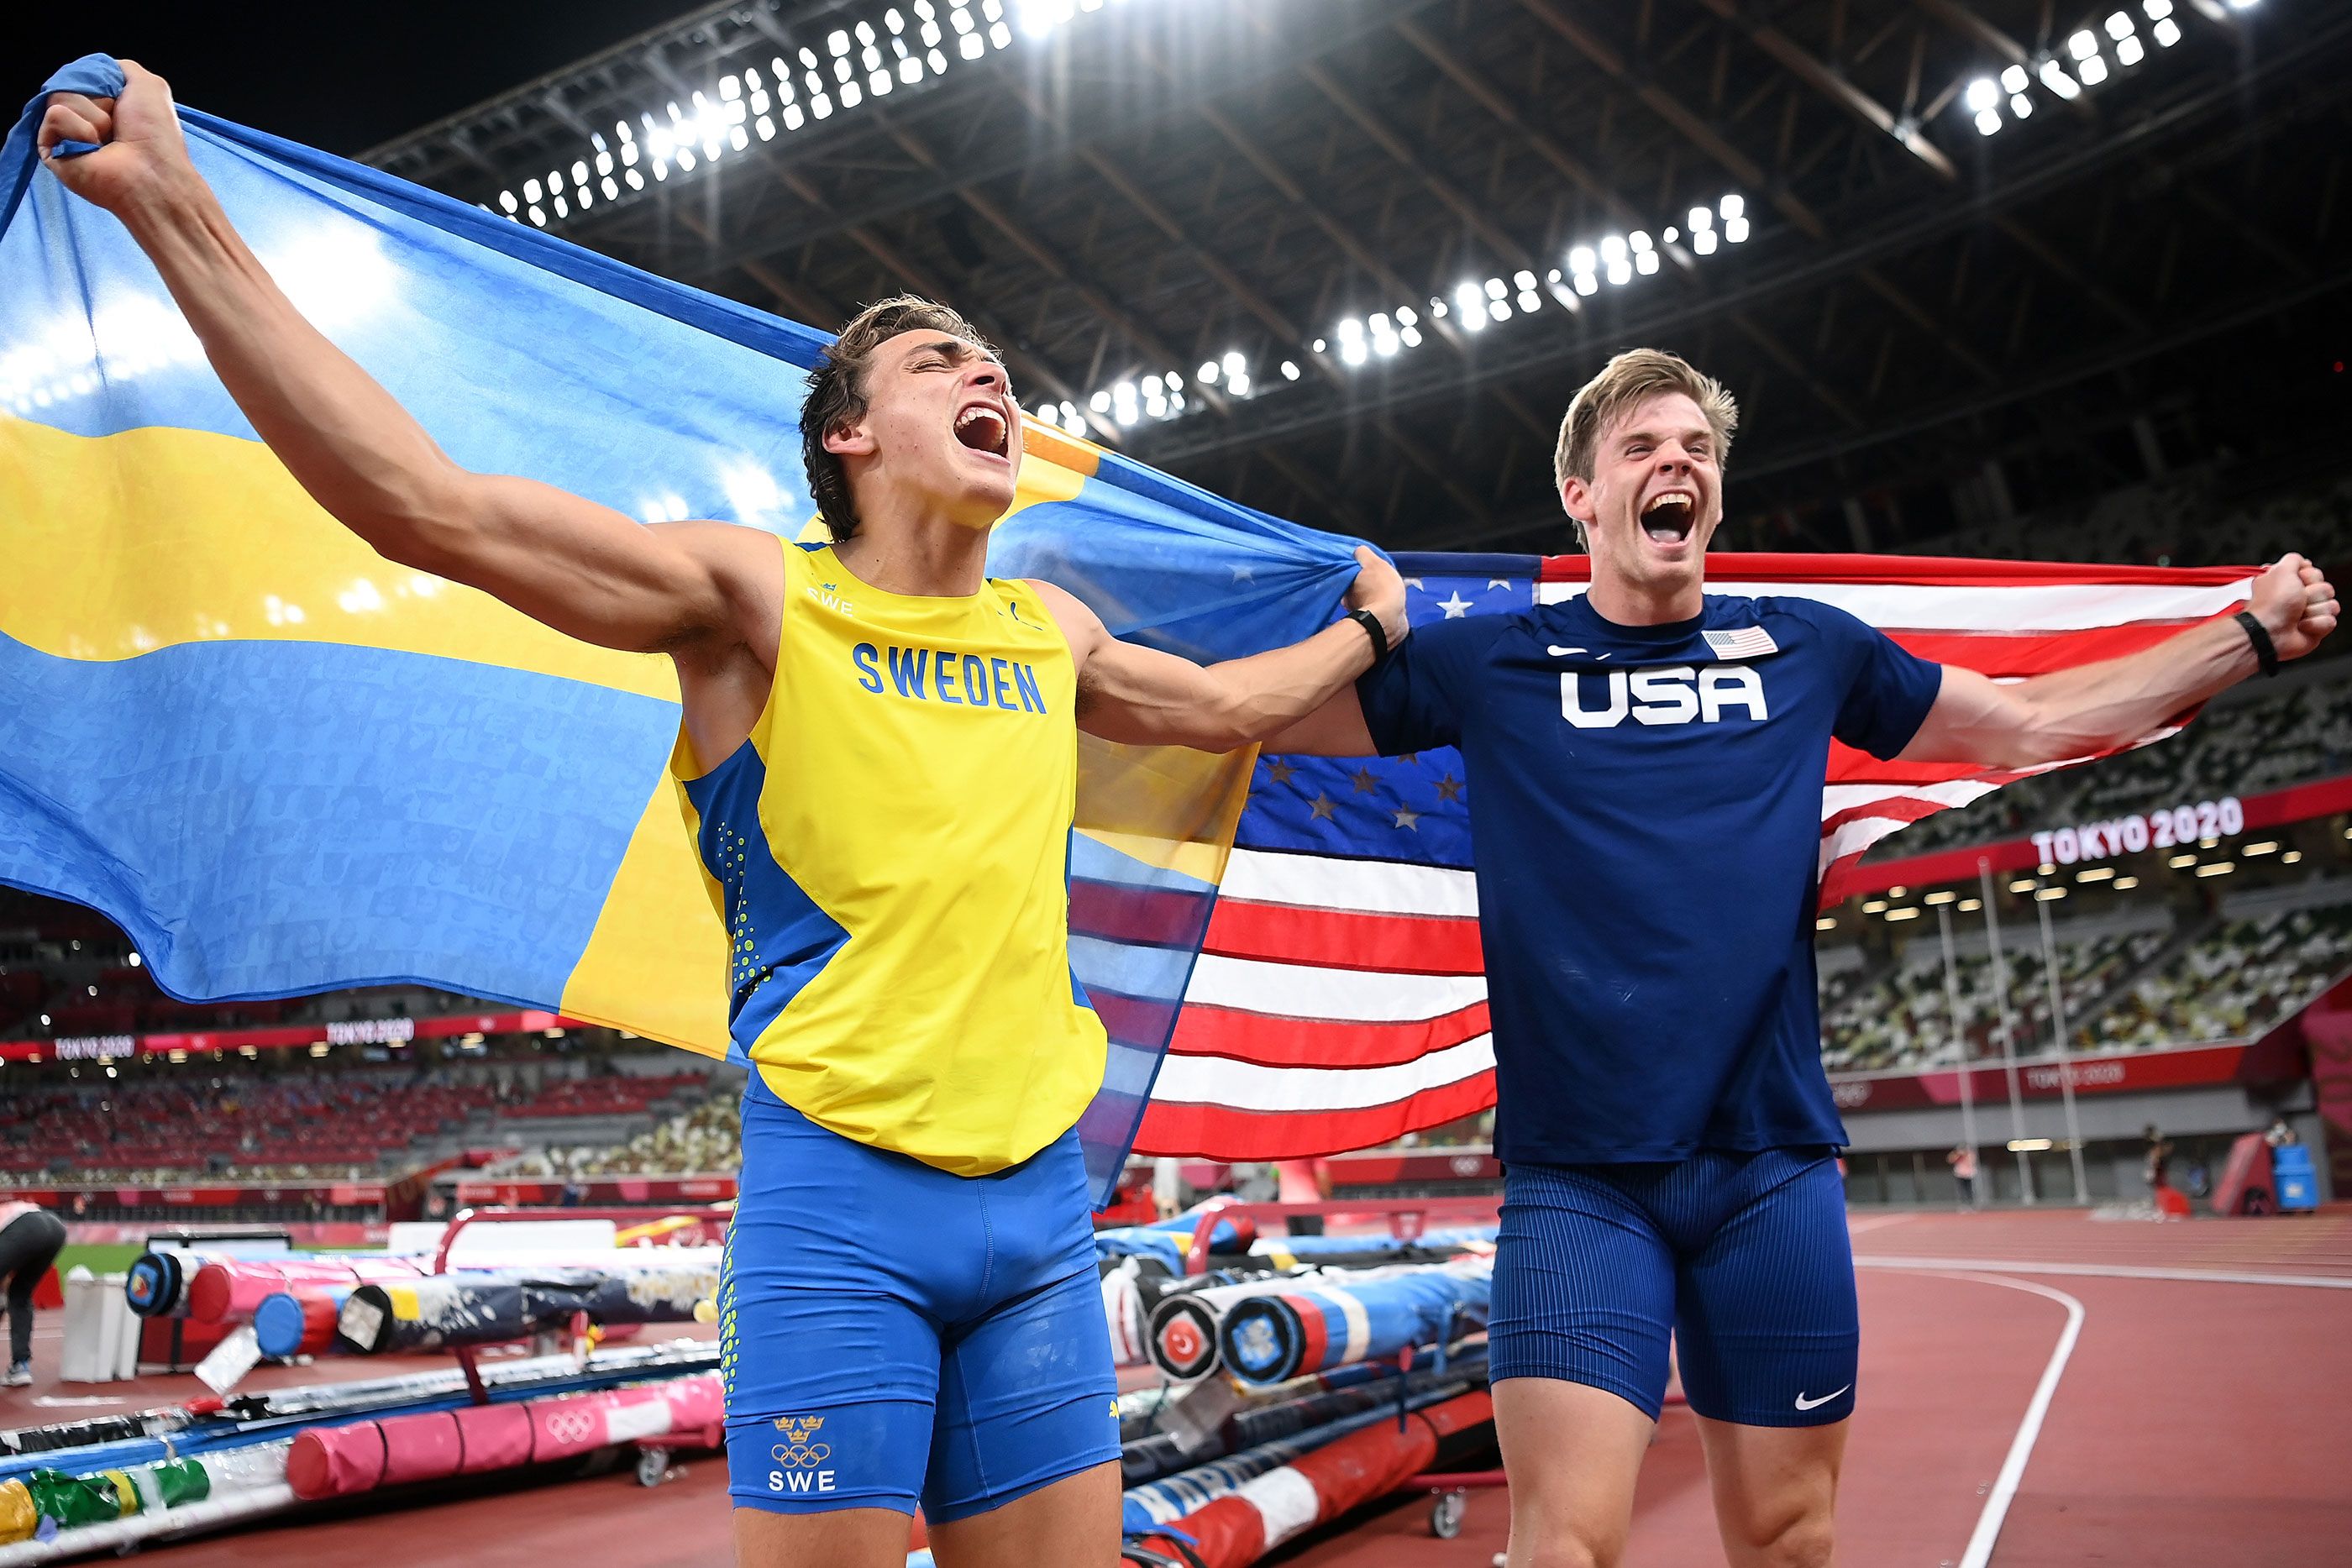 Champion Mondo Duplantis and silver medallist Chris Nilsen celebrate their success at the Olympics in Tokyo